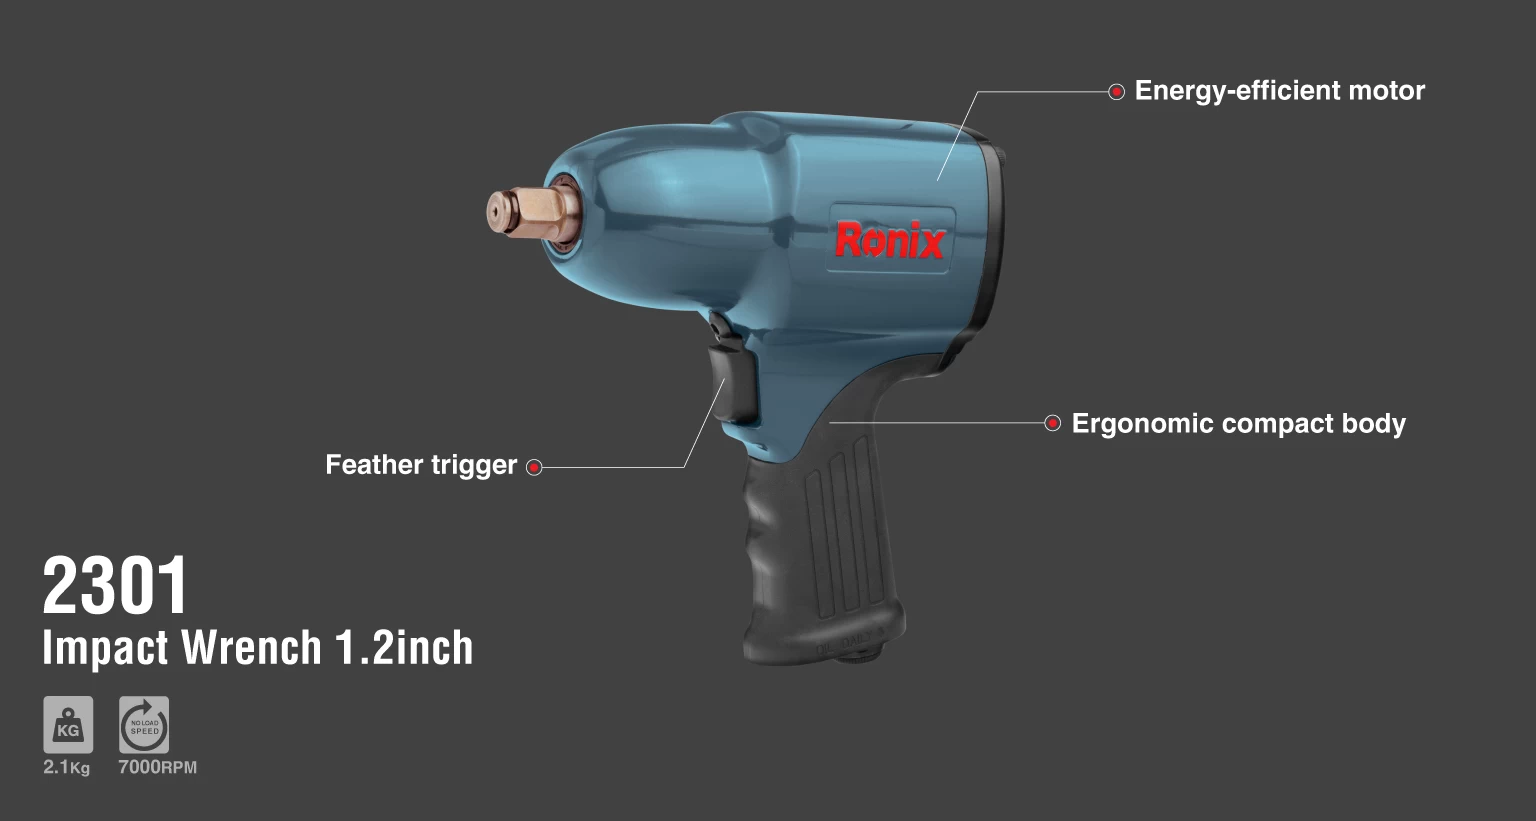 Pin Clutch Air Impact Wrench-1/2 Inch_details